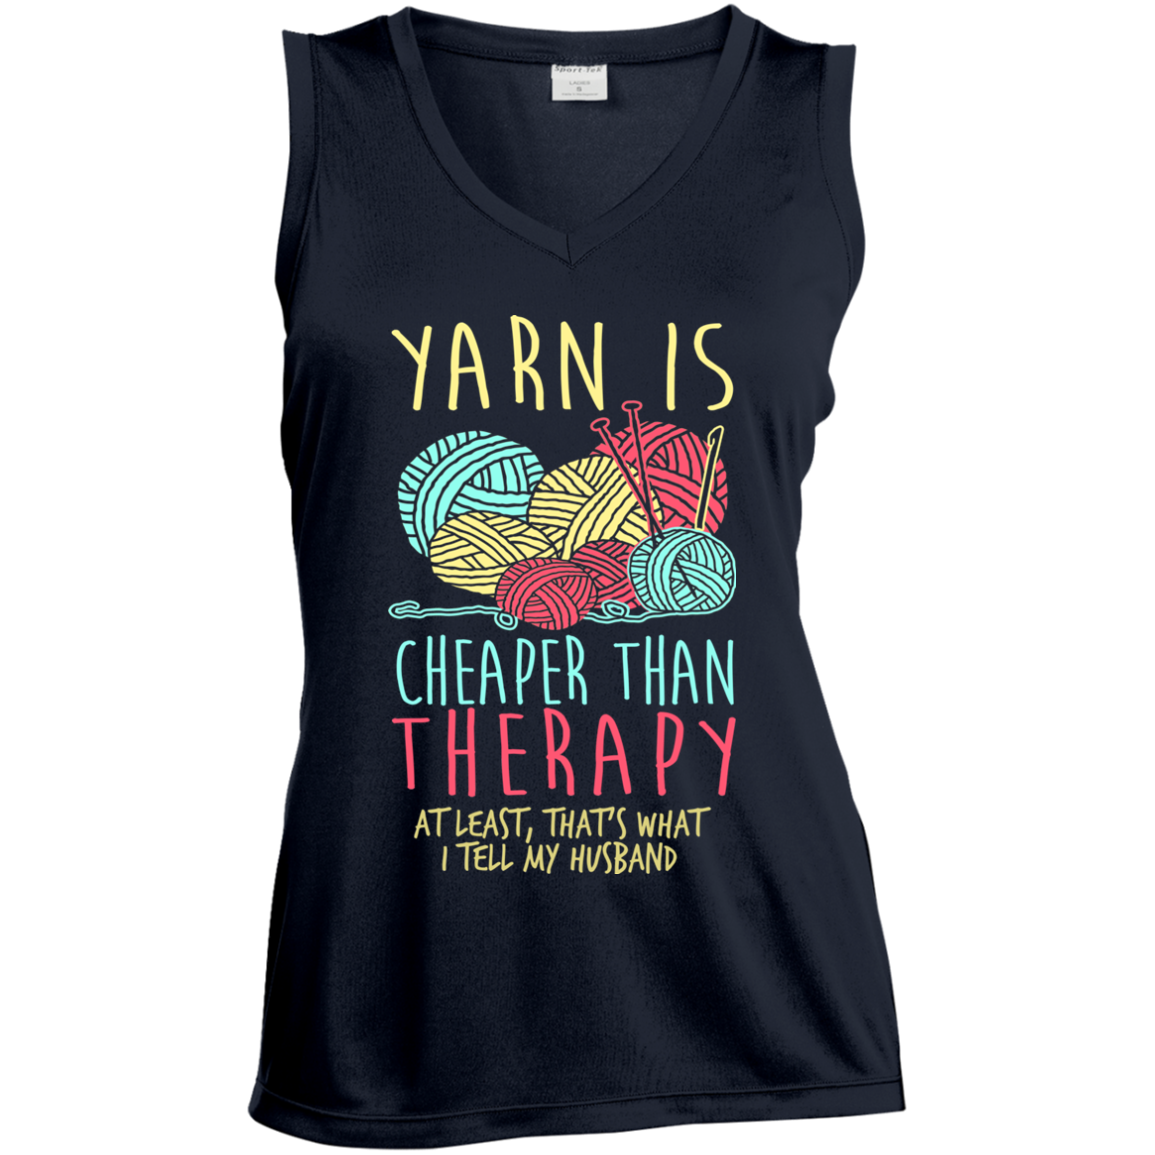 Yarn is Cheaper than Therapy Ladies Sleeveless Moisture Absorbing V-Neck